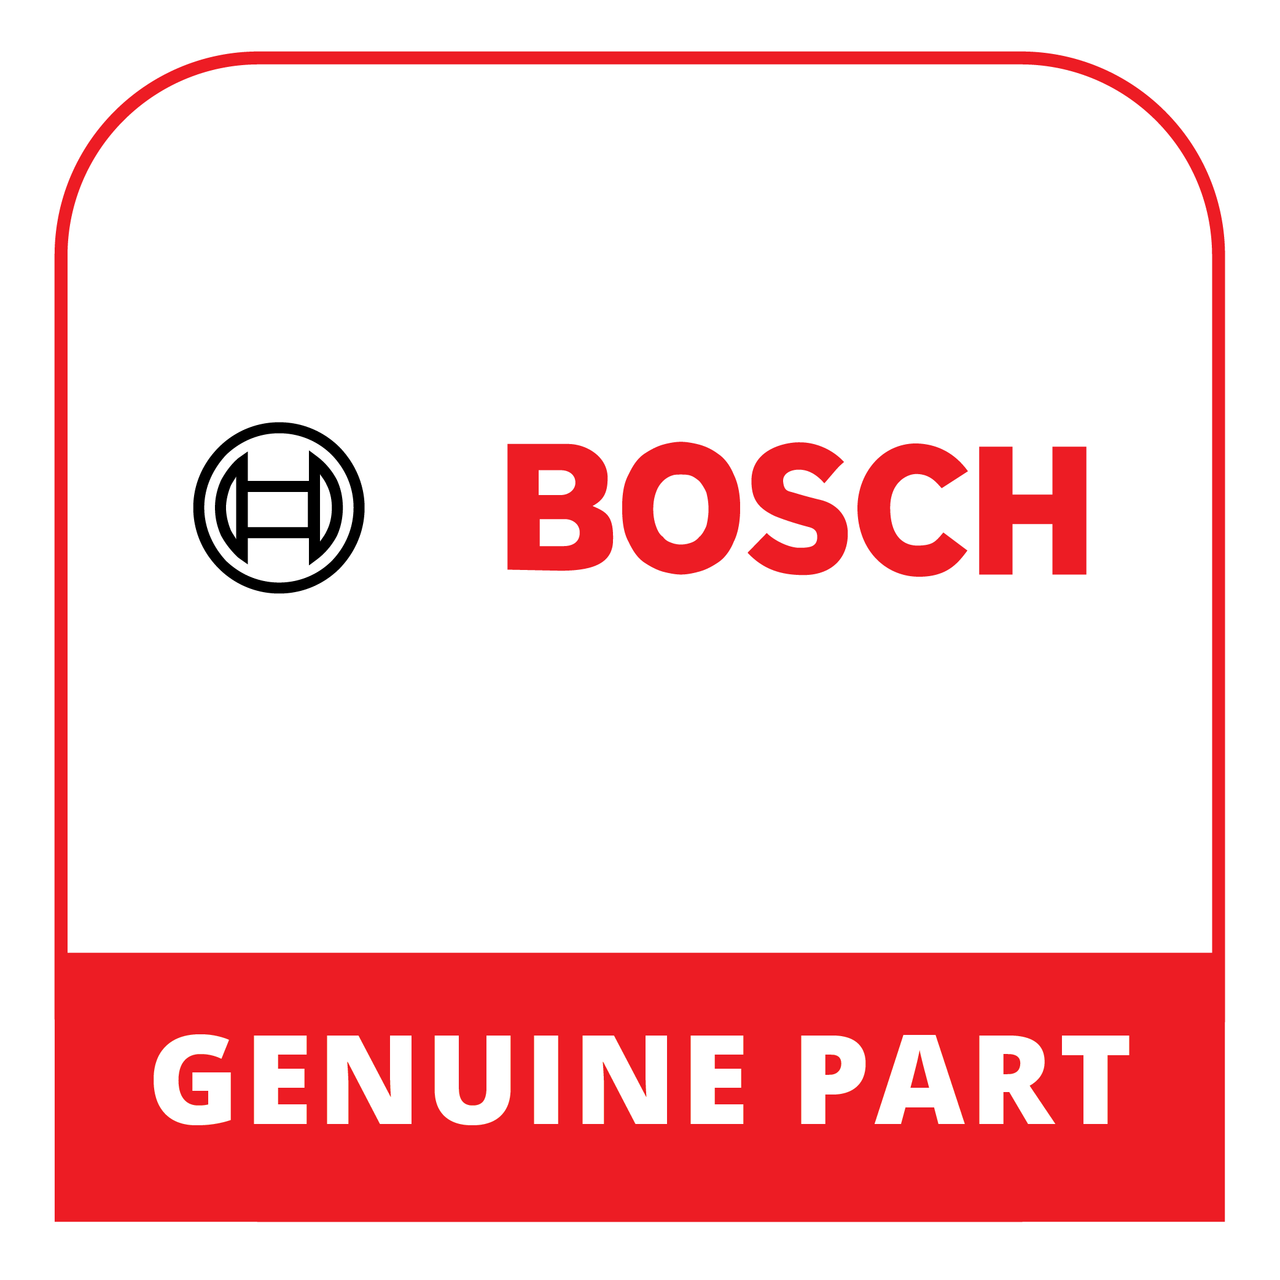 Bosch (Thermador) 17005626 - Knob-Cooking Area - Genuine Bosch (Thermador) Part